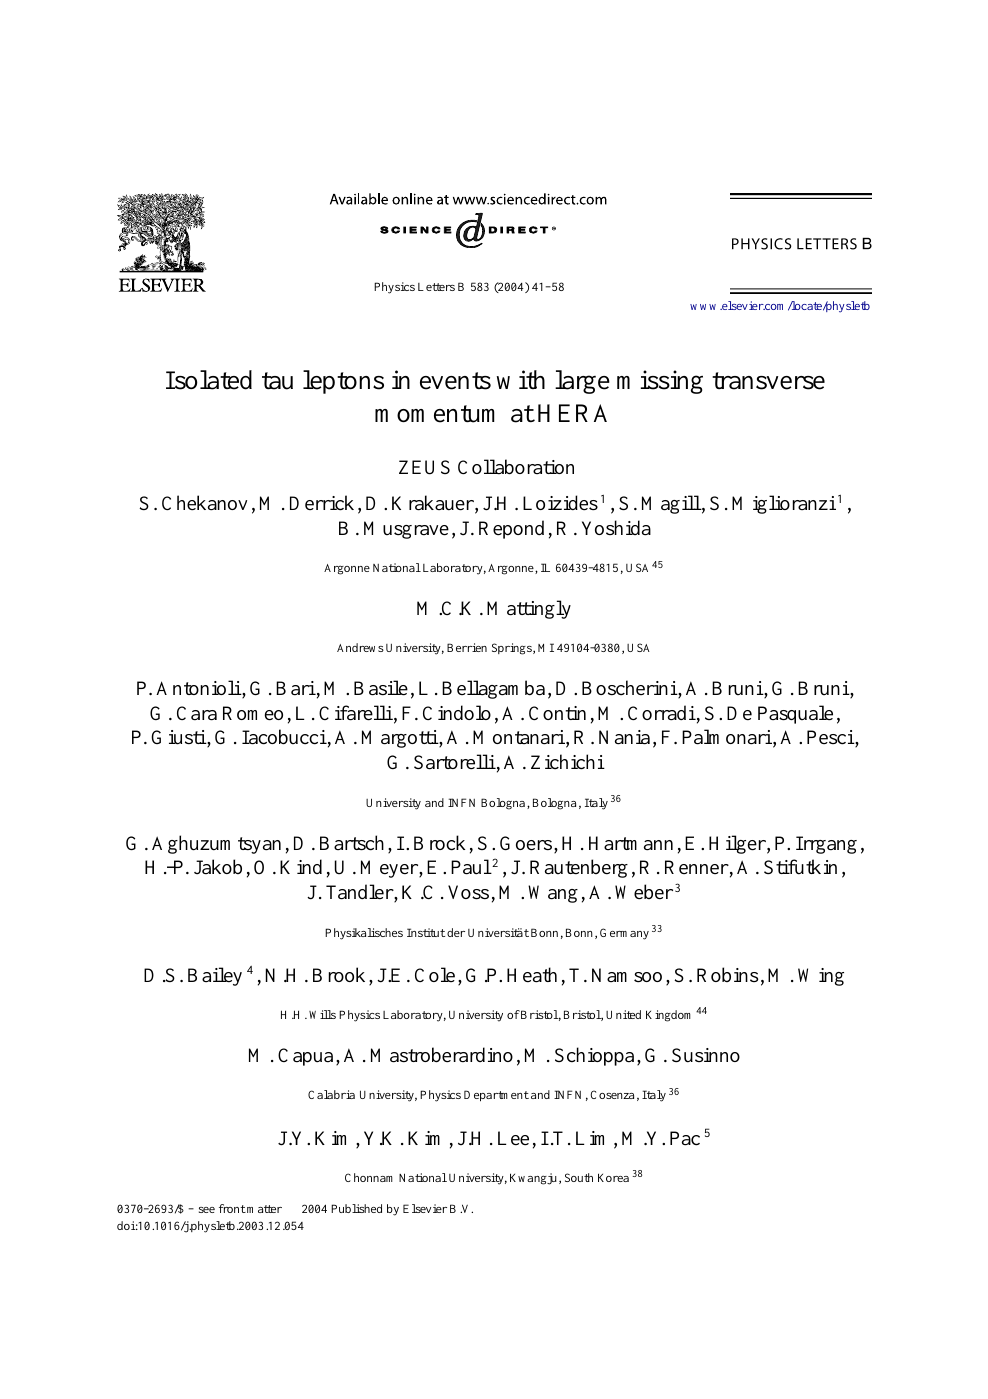 Isolated Tau Leptons In Events With Large Missing Transverse Momentum At Hera Topic Of Research Paper In Physical Sciences Download Scholarly Article Pdf And Read For Free On Cyberleninka Open Science